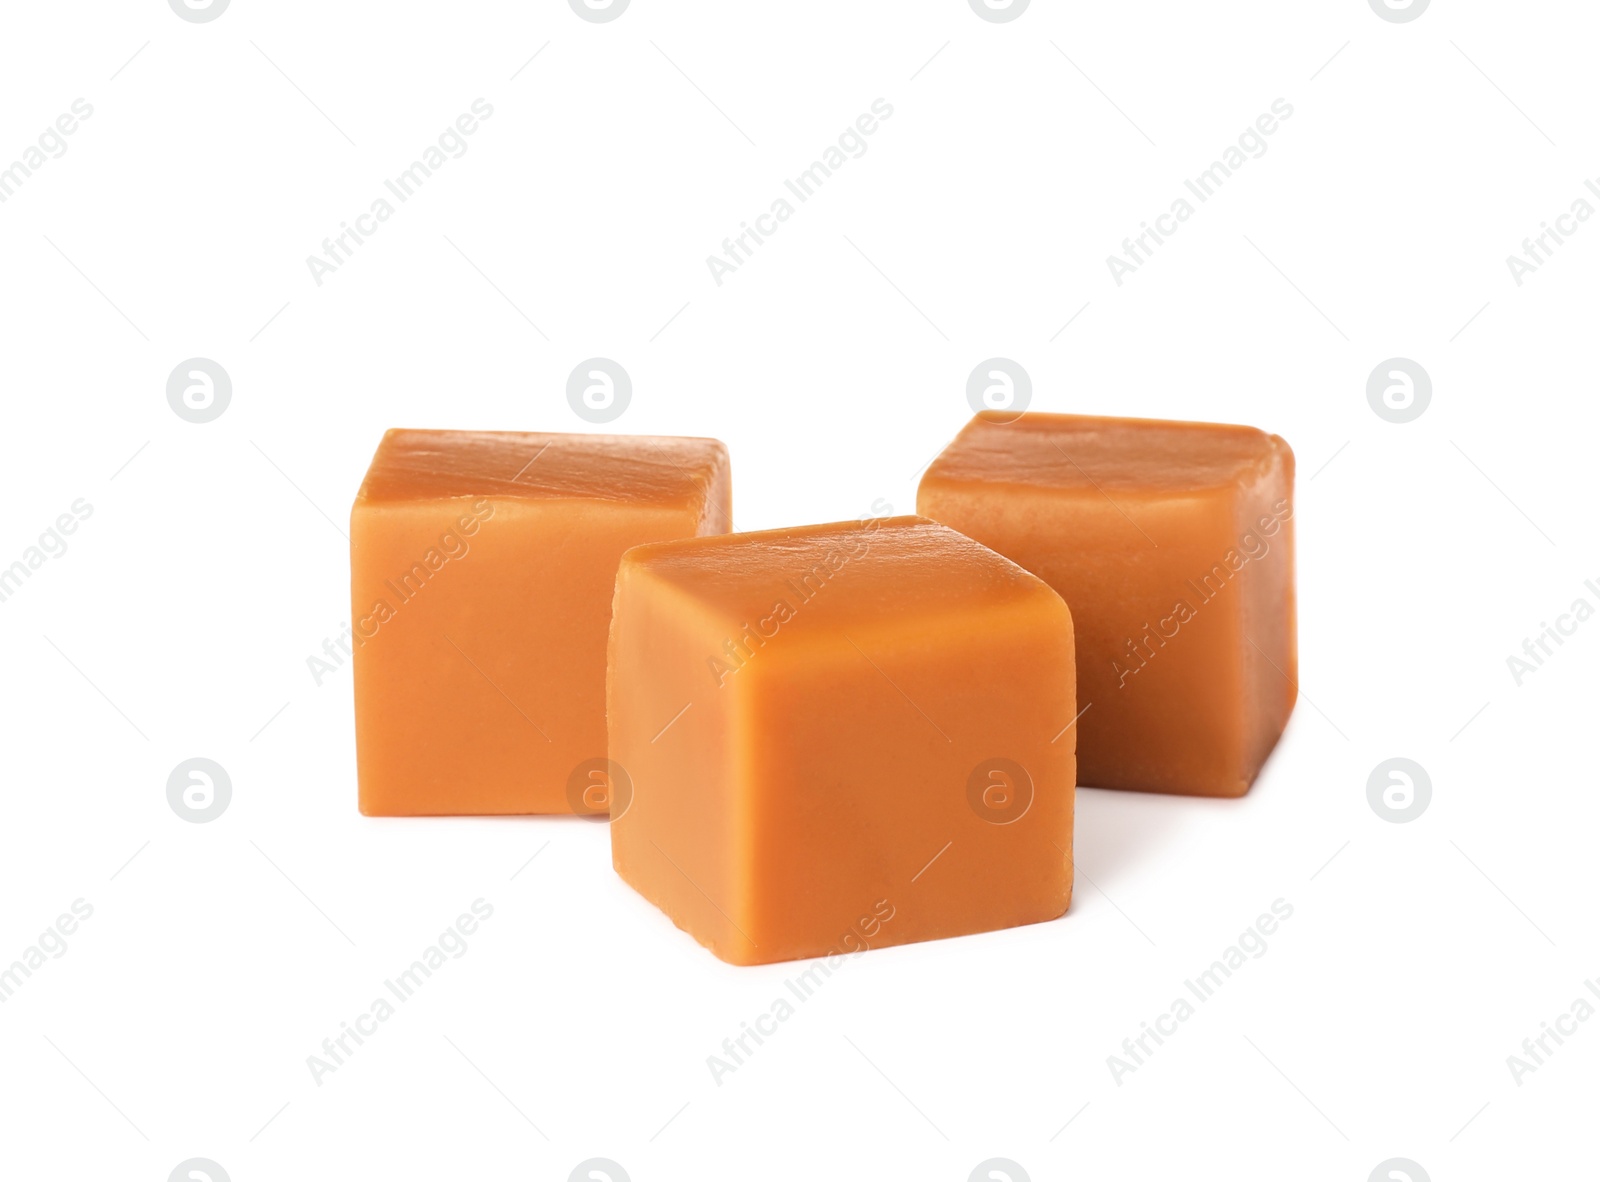 Photo of Heap of caramel candies on white background